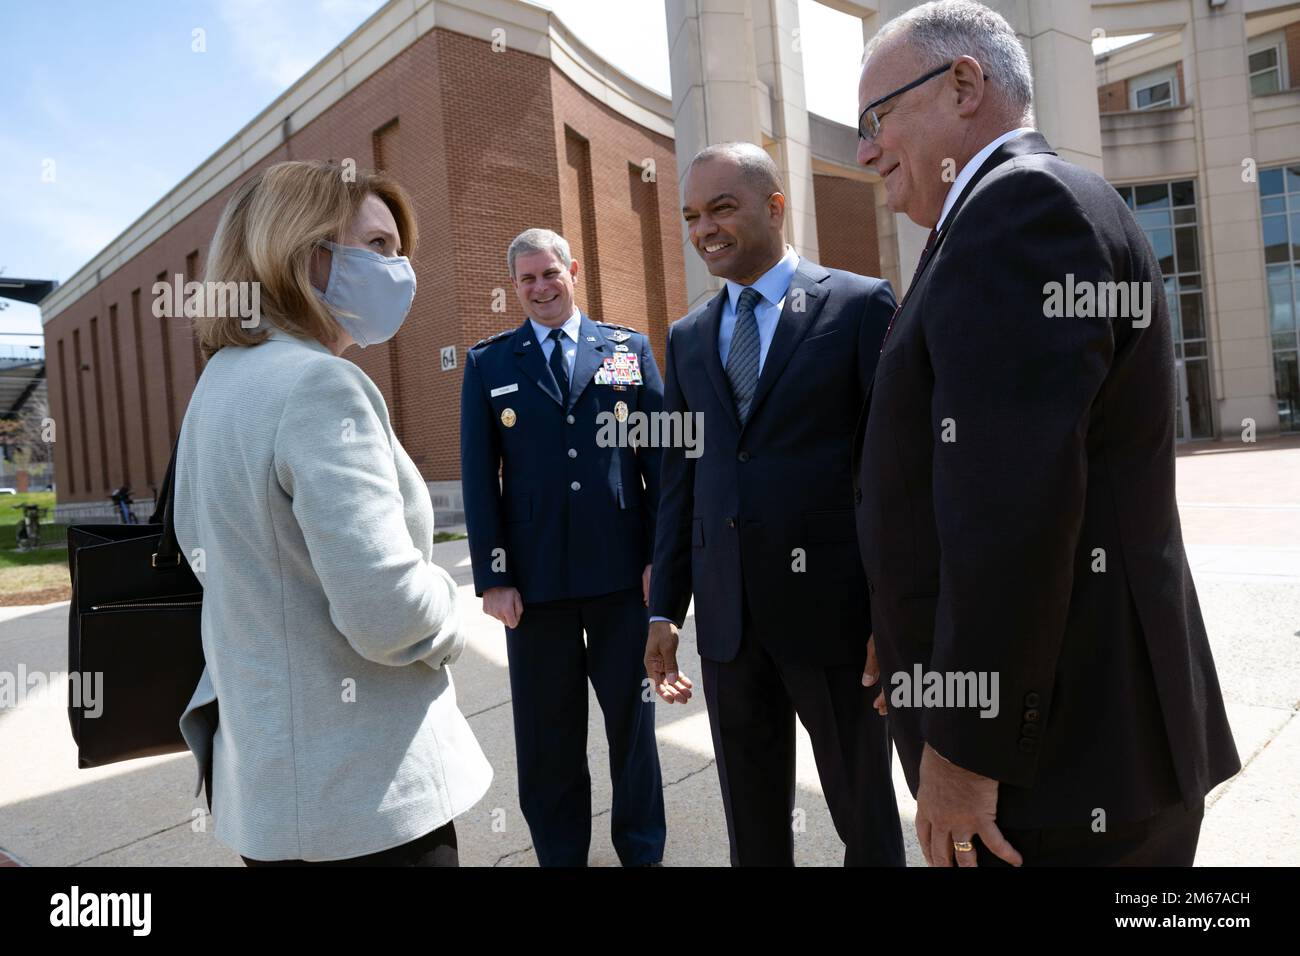 Deputy Secretary of Defense Kathleen H. Hicks greets, from left, Air Force Lt. Gen. Michael T. Plehn, president of the National Defense University; Gregory S. Nixon, Business Executives for National Security (BENS) Board of Directors; and BENS Chief Operating Officer Guy “Tom” Cosentino, before an industry discussion at the National Defense University, Washington, D.C., April 11, 2022. (DoD photo by Lisa Ferdinando) Stock Photo